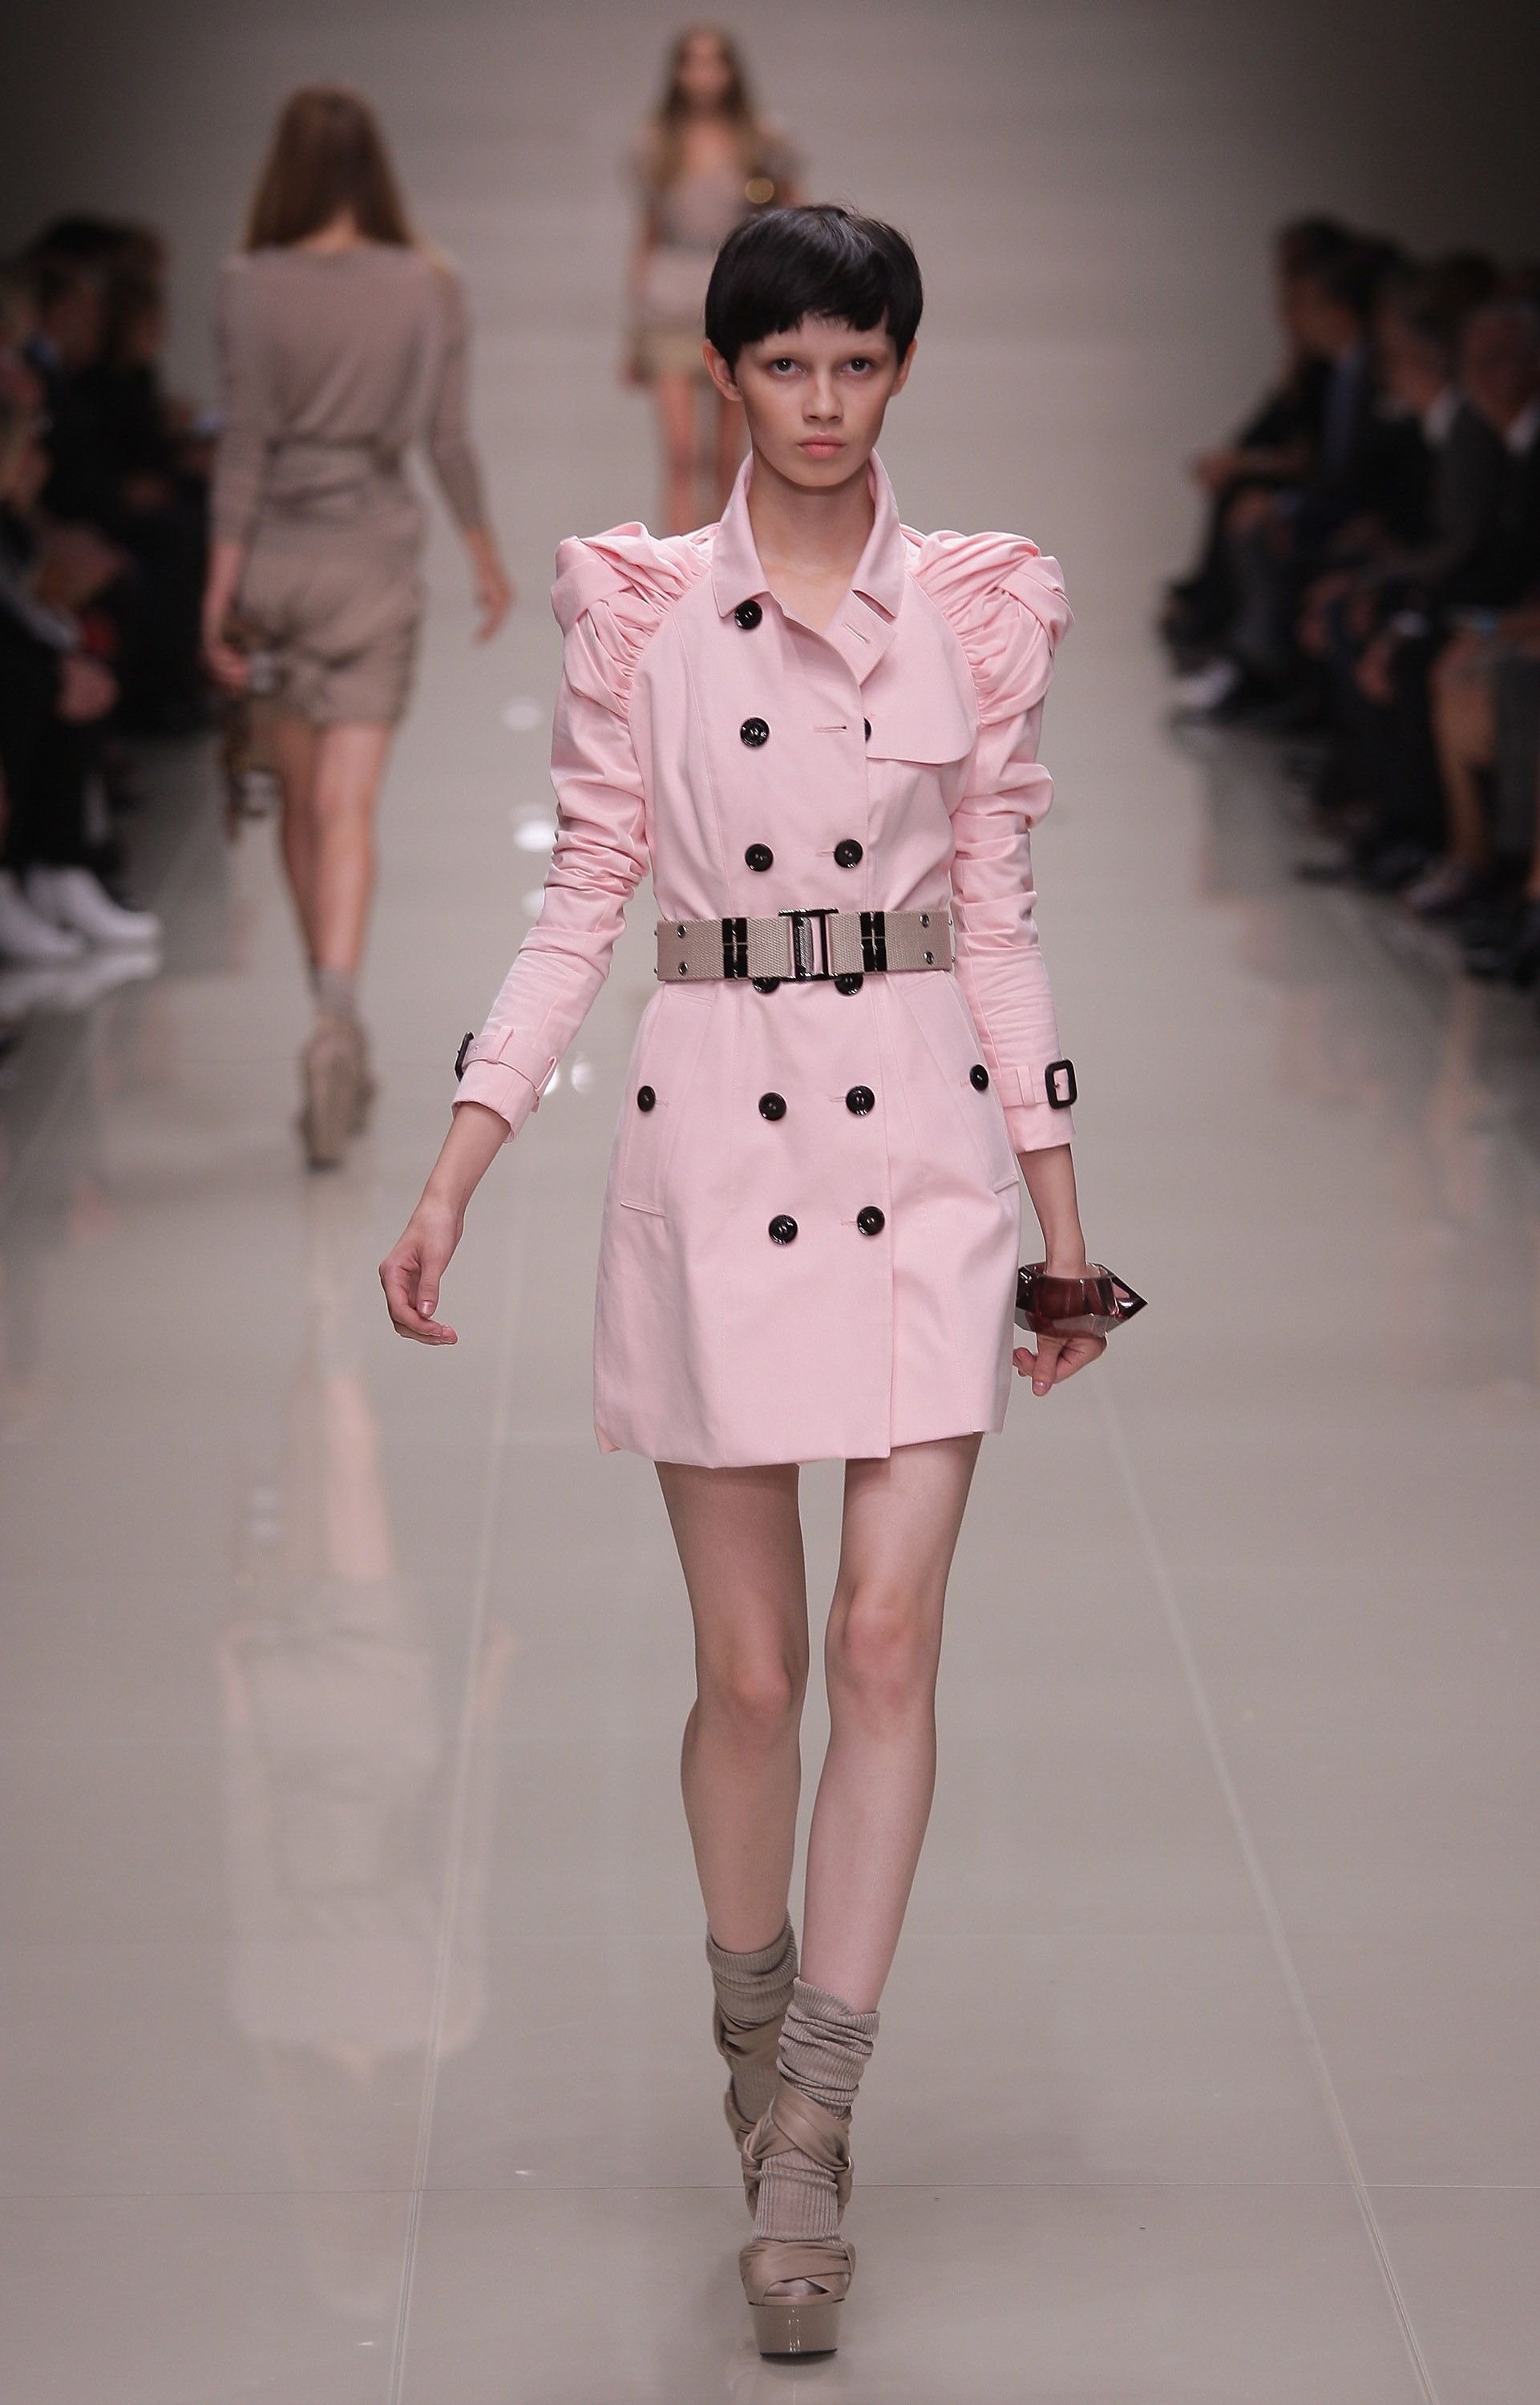 christopher bailey’s most iconic burberry trench coats